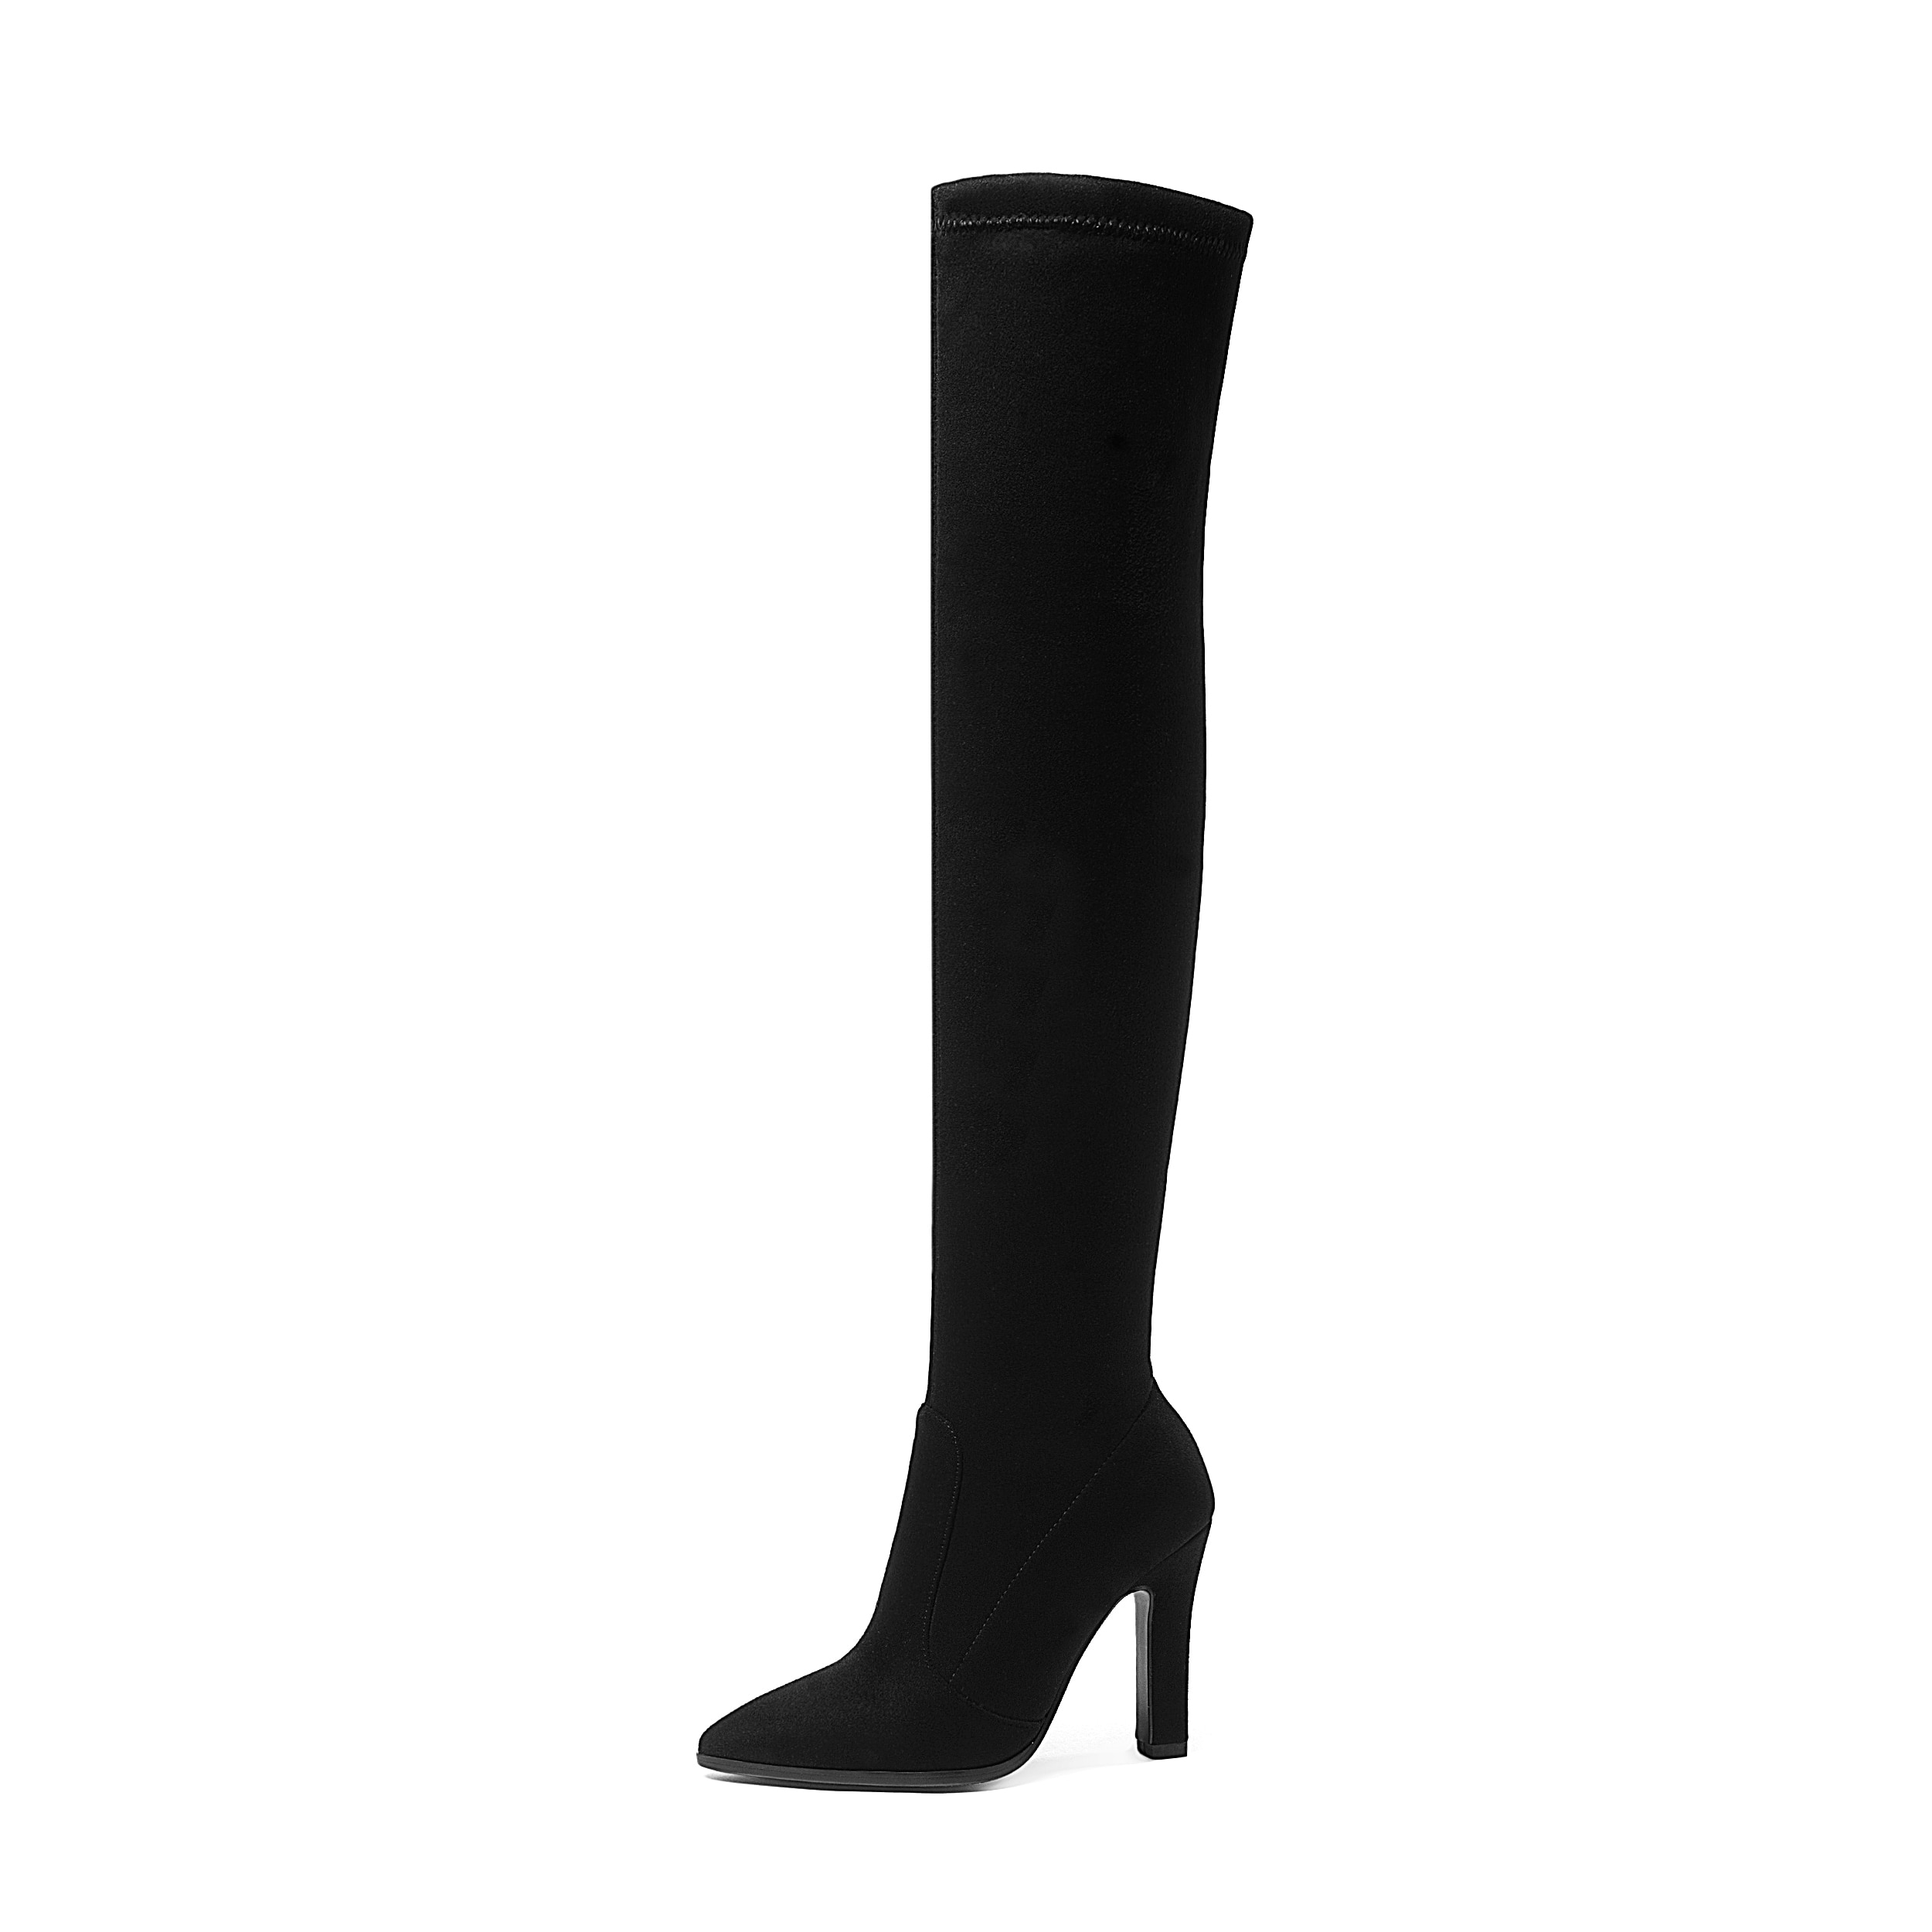 The Sexy Over Knee High Heel Slip On Boots Are Stunning.